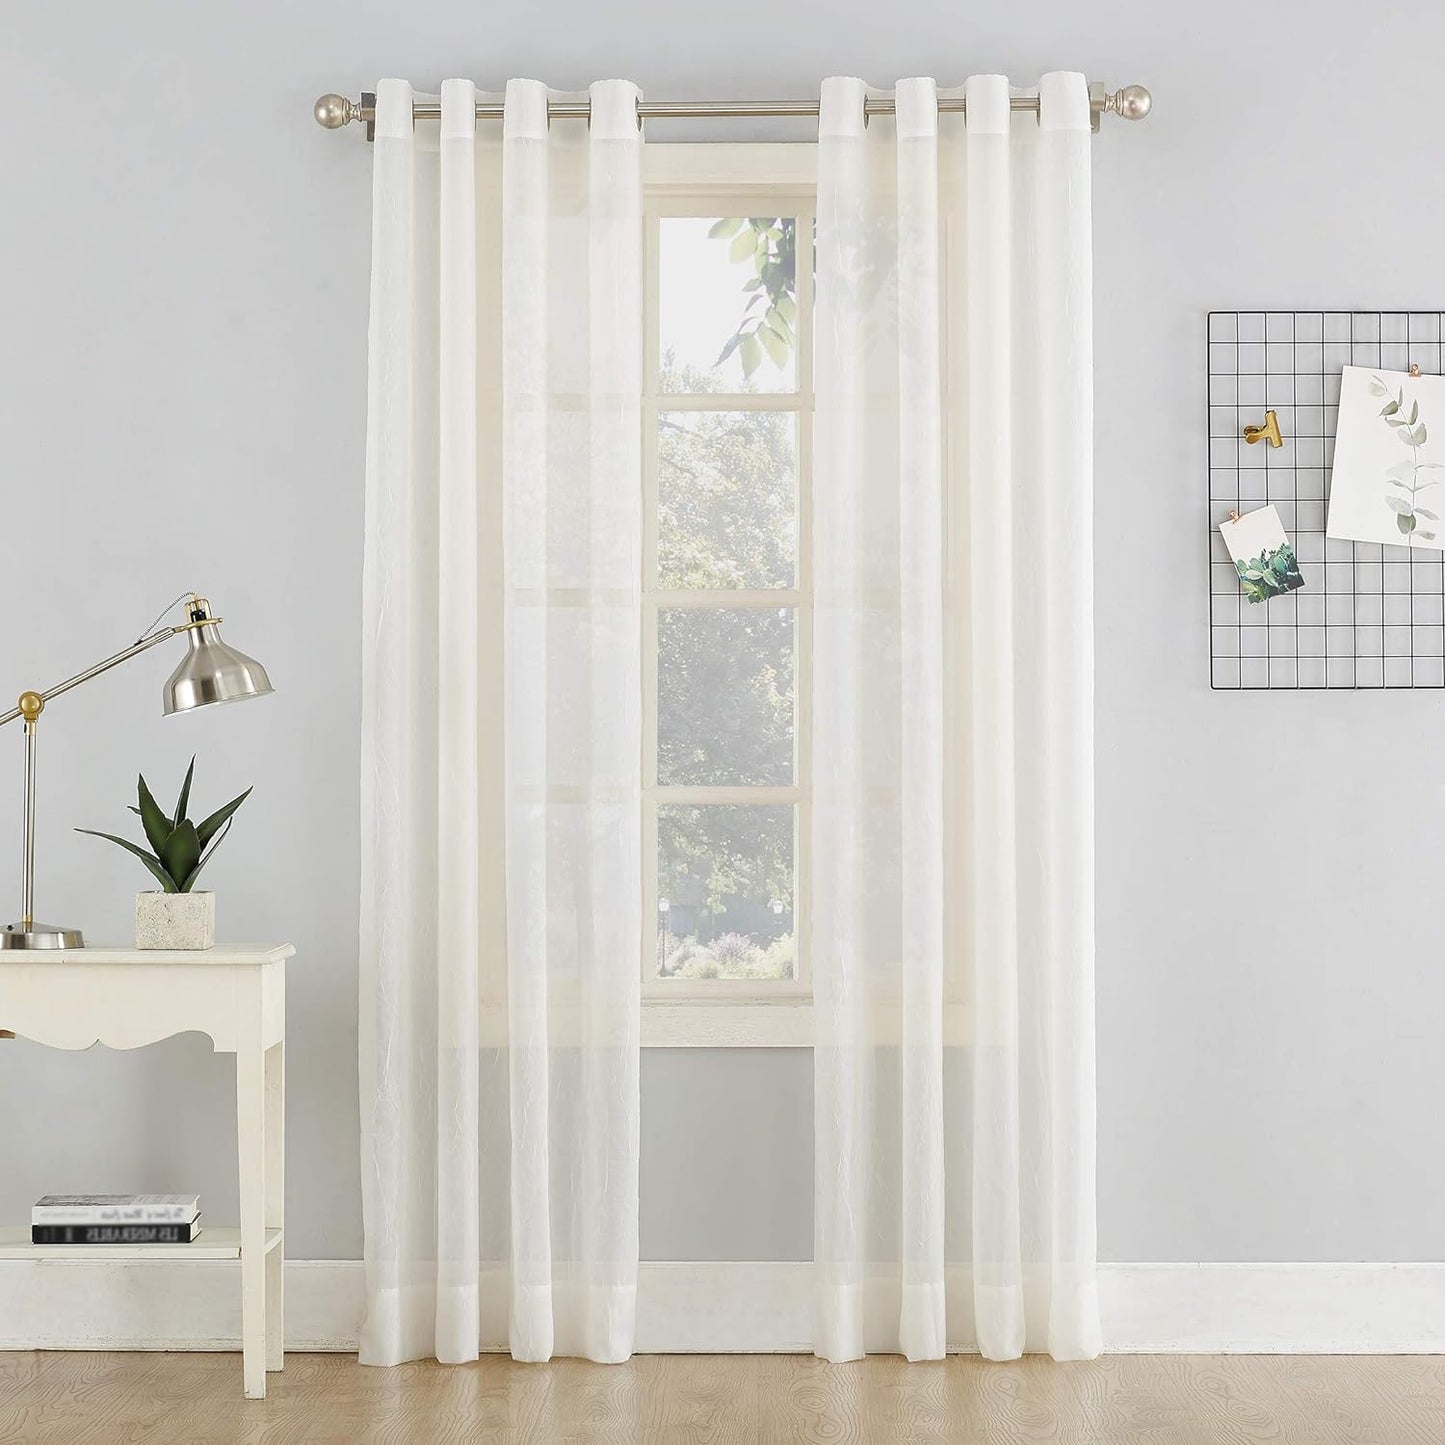 No. 918 Erica Crushed Sheer Voile Grommet Curtain Panel 84.00" X 51.00"  No. 918 Eggshell Off-White 51" X 95" Panel 